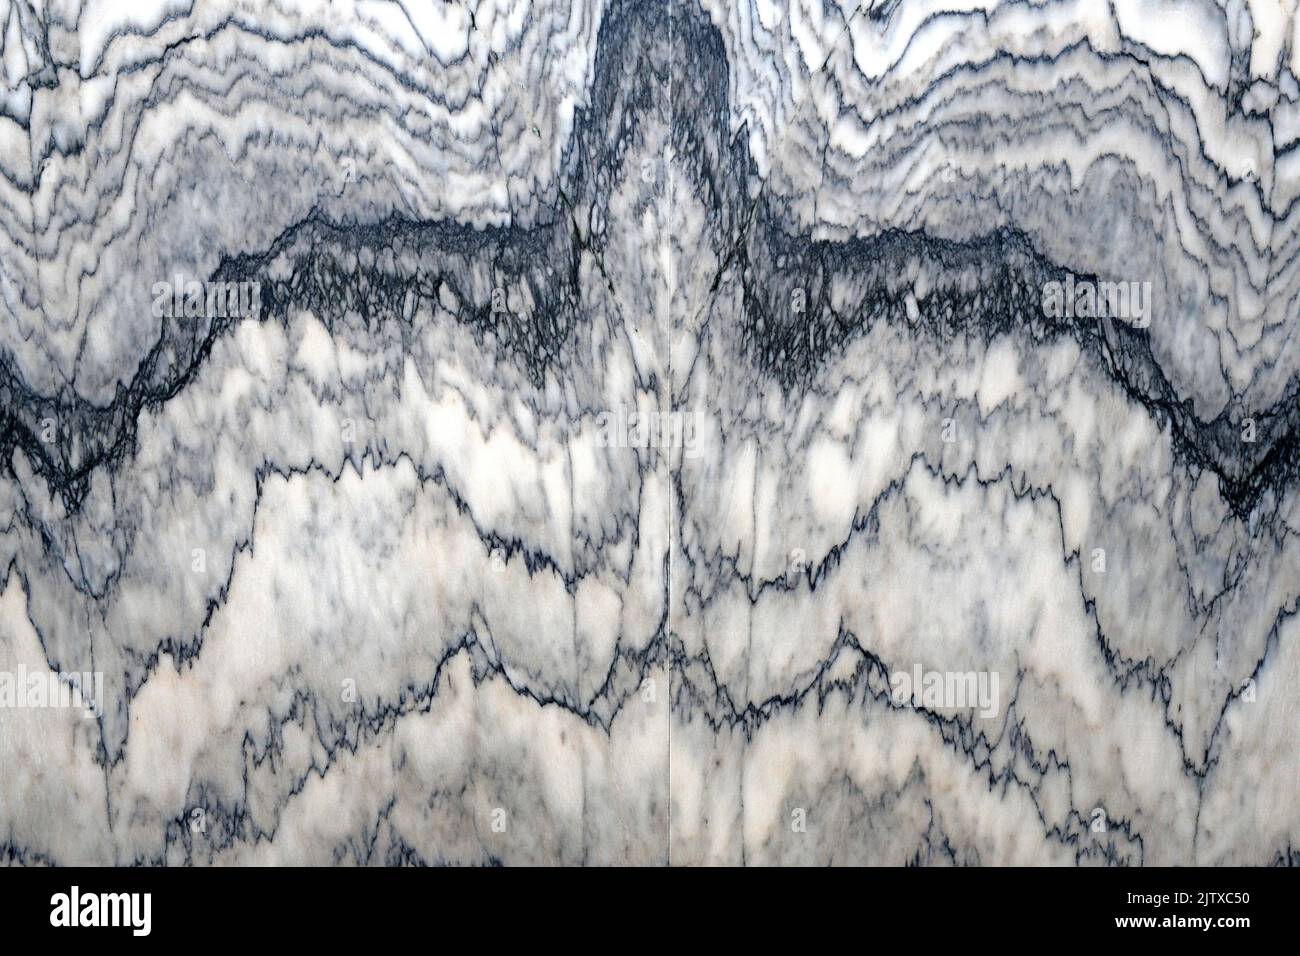 Polish marble with veins. This photo was taken in Vila Viçosa, Portugal. Stock Photo